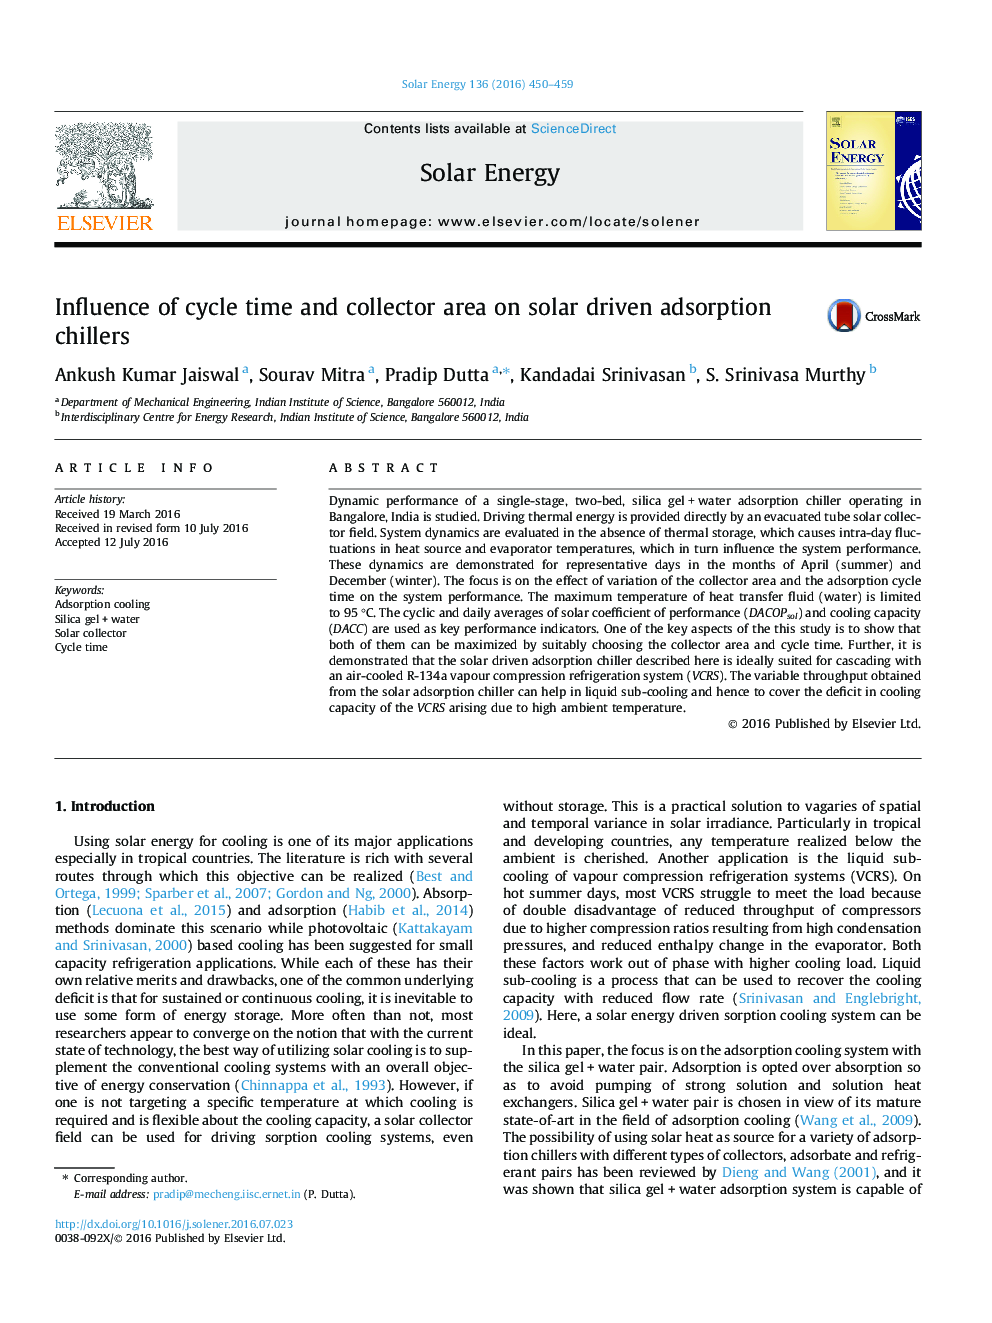 Influence of cycle time and collector area on solar driven adsorption chillers